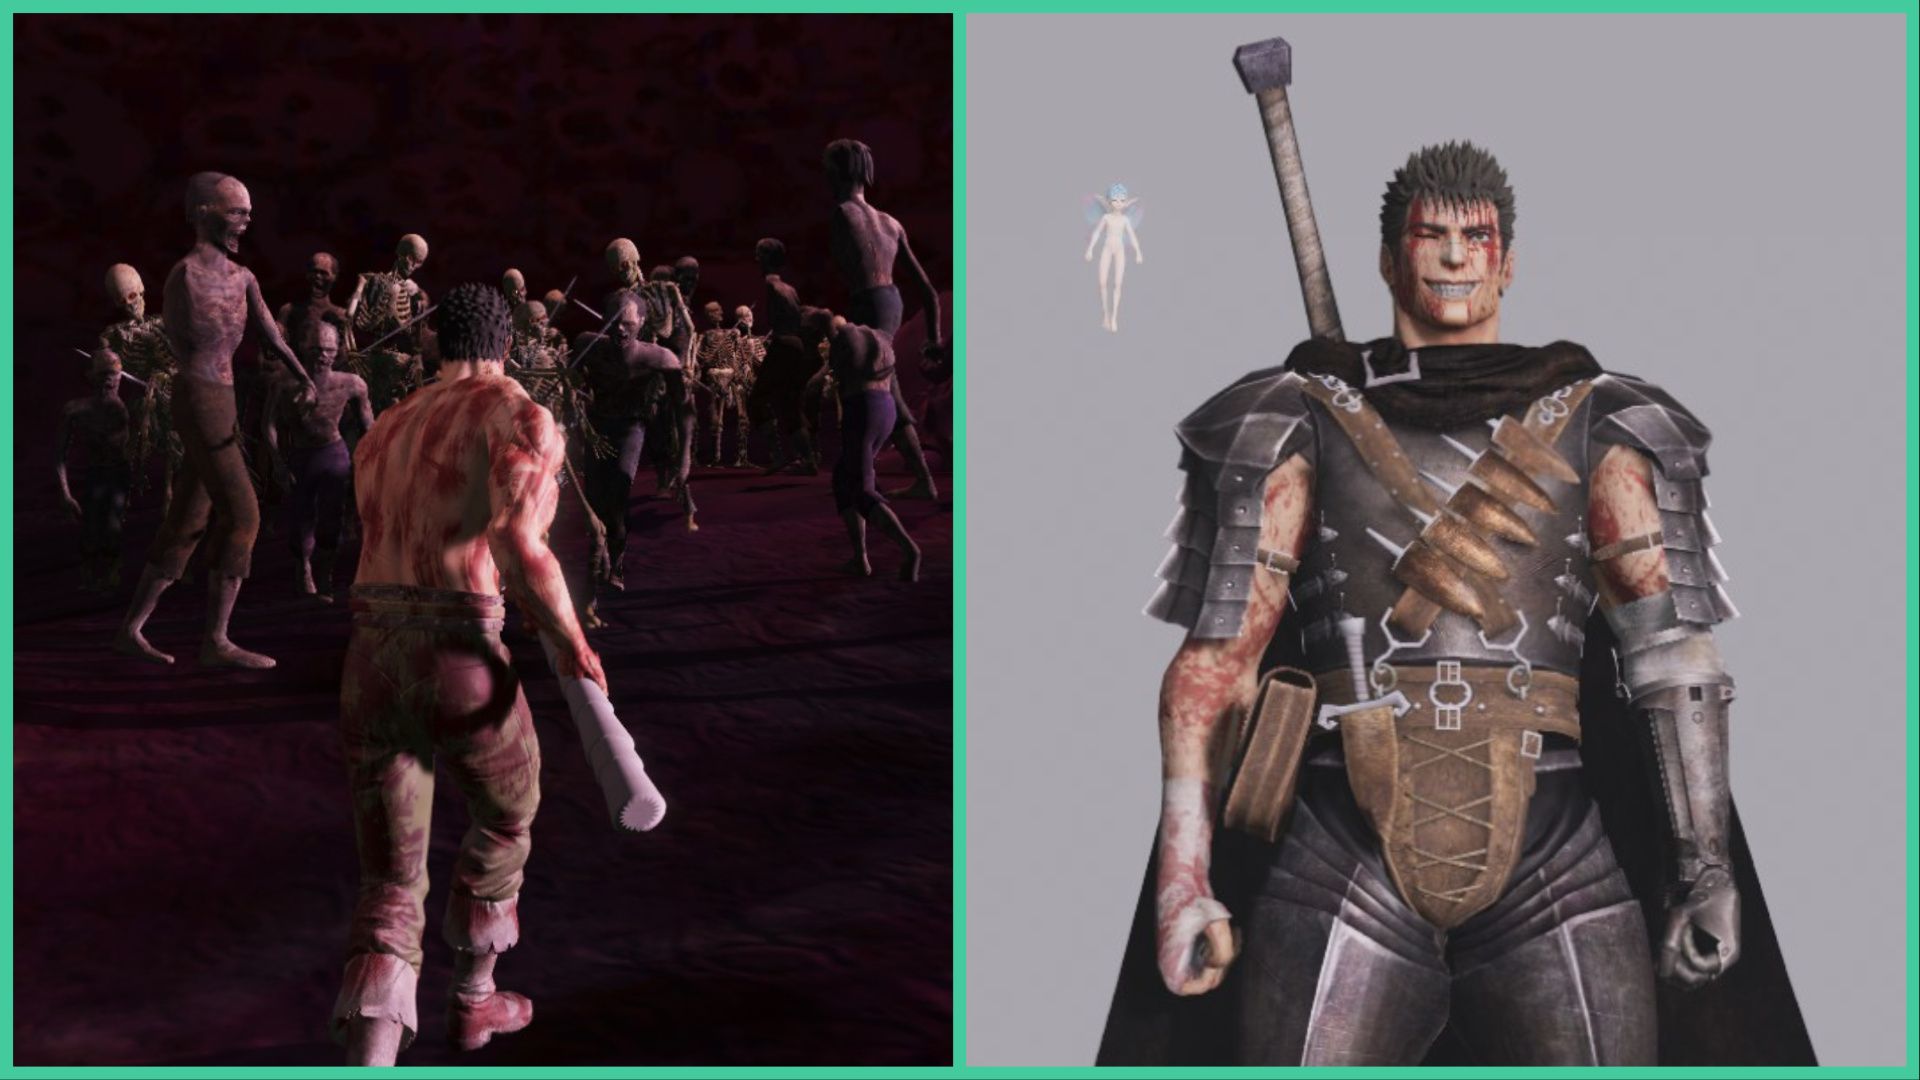 feature image for our berserk survivor news, the image features two promo screenshots from the game, with the image on the left showing guts holding a weapon as his torso is covered in injuries as he approaches a horde of undead, the image on the right is of guts in-game smiling as puck floats beside him